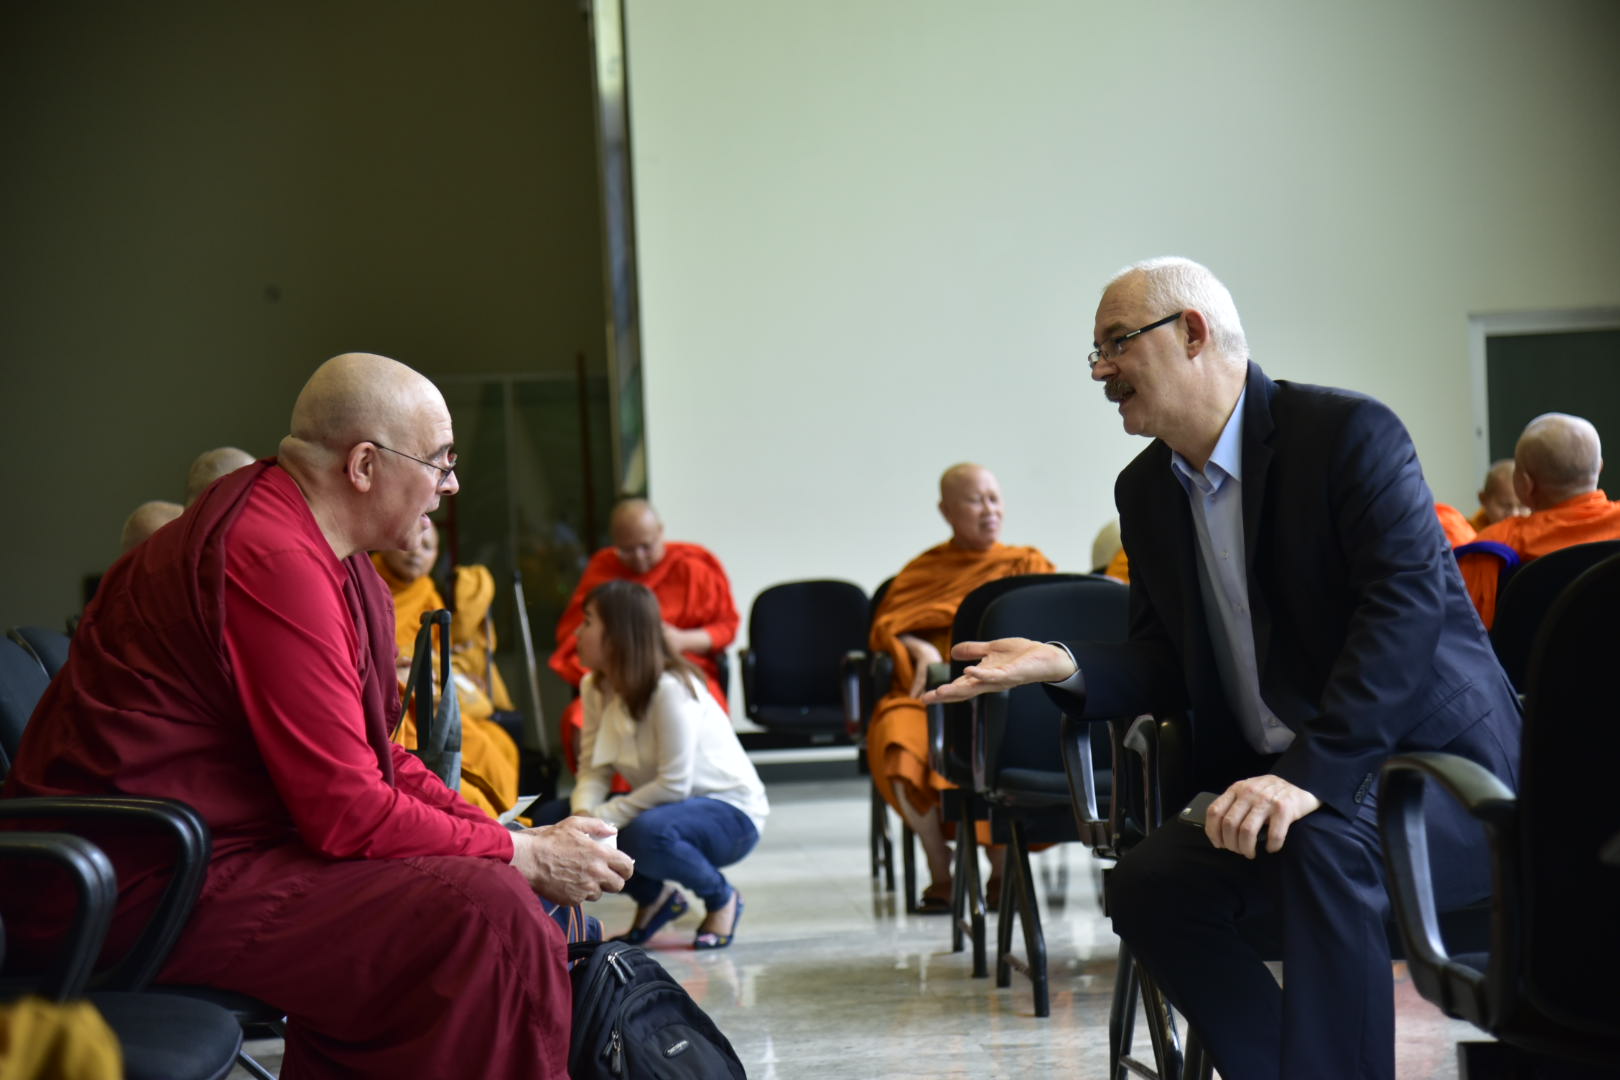 Arriving to Sri Lanka, meeting with an old friend, Bhikkhu Nandisena from Mexico.